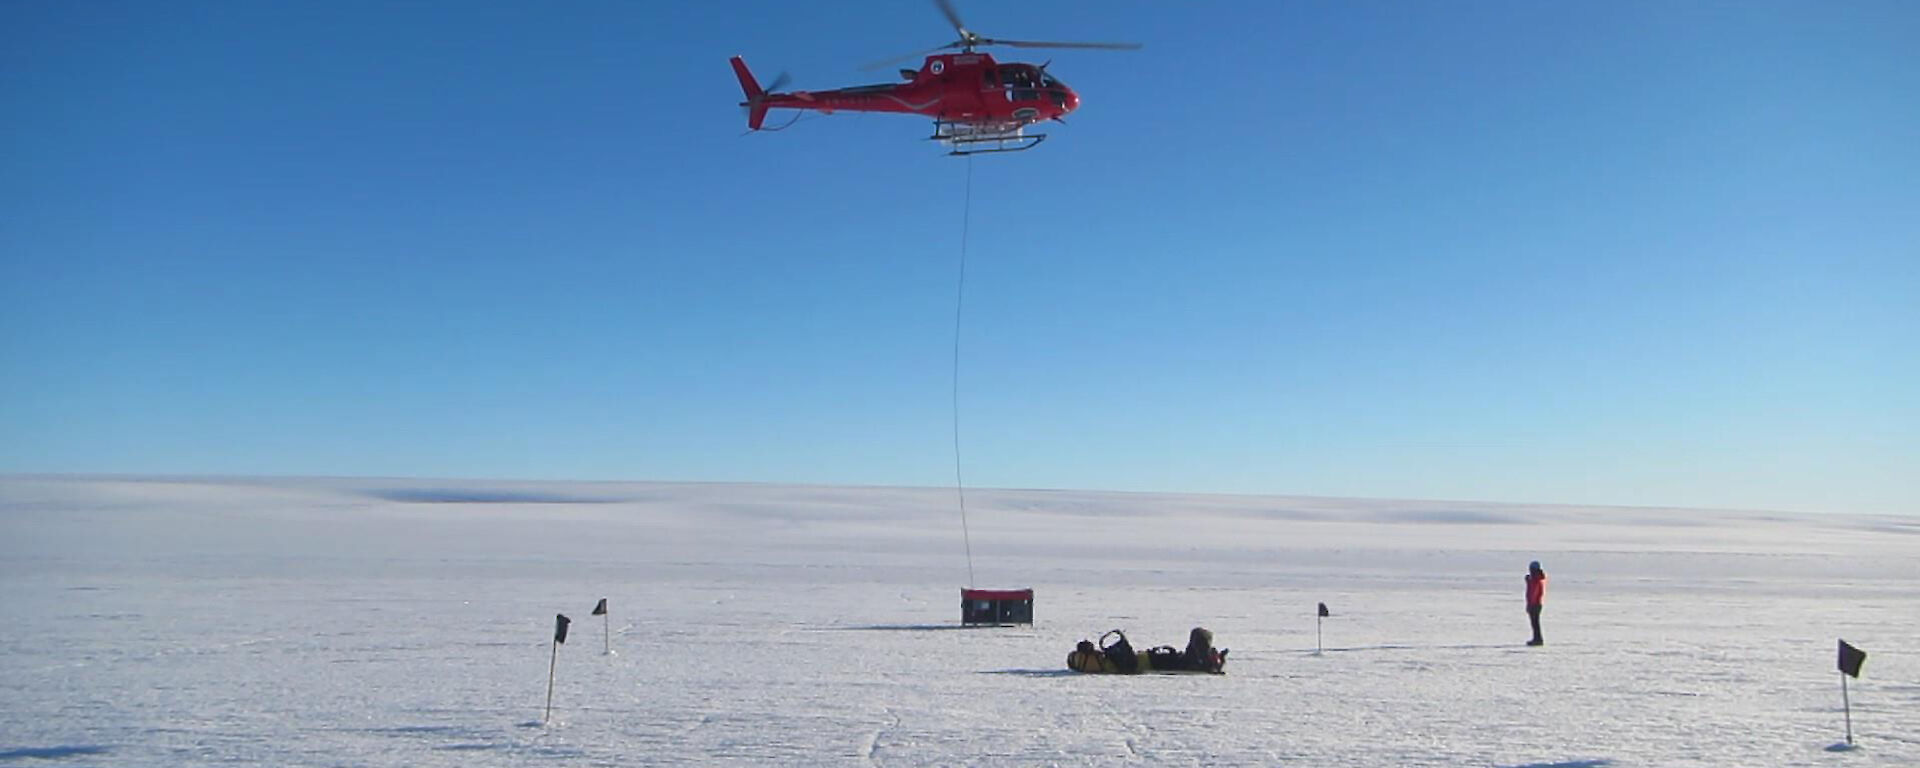 The helicopter gently begins to lift a cage pallet full of equipment to a new site on the glacier.